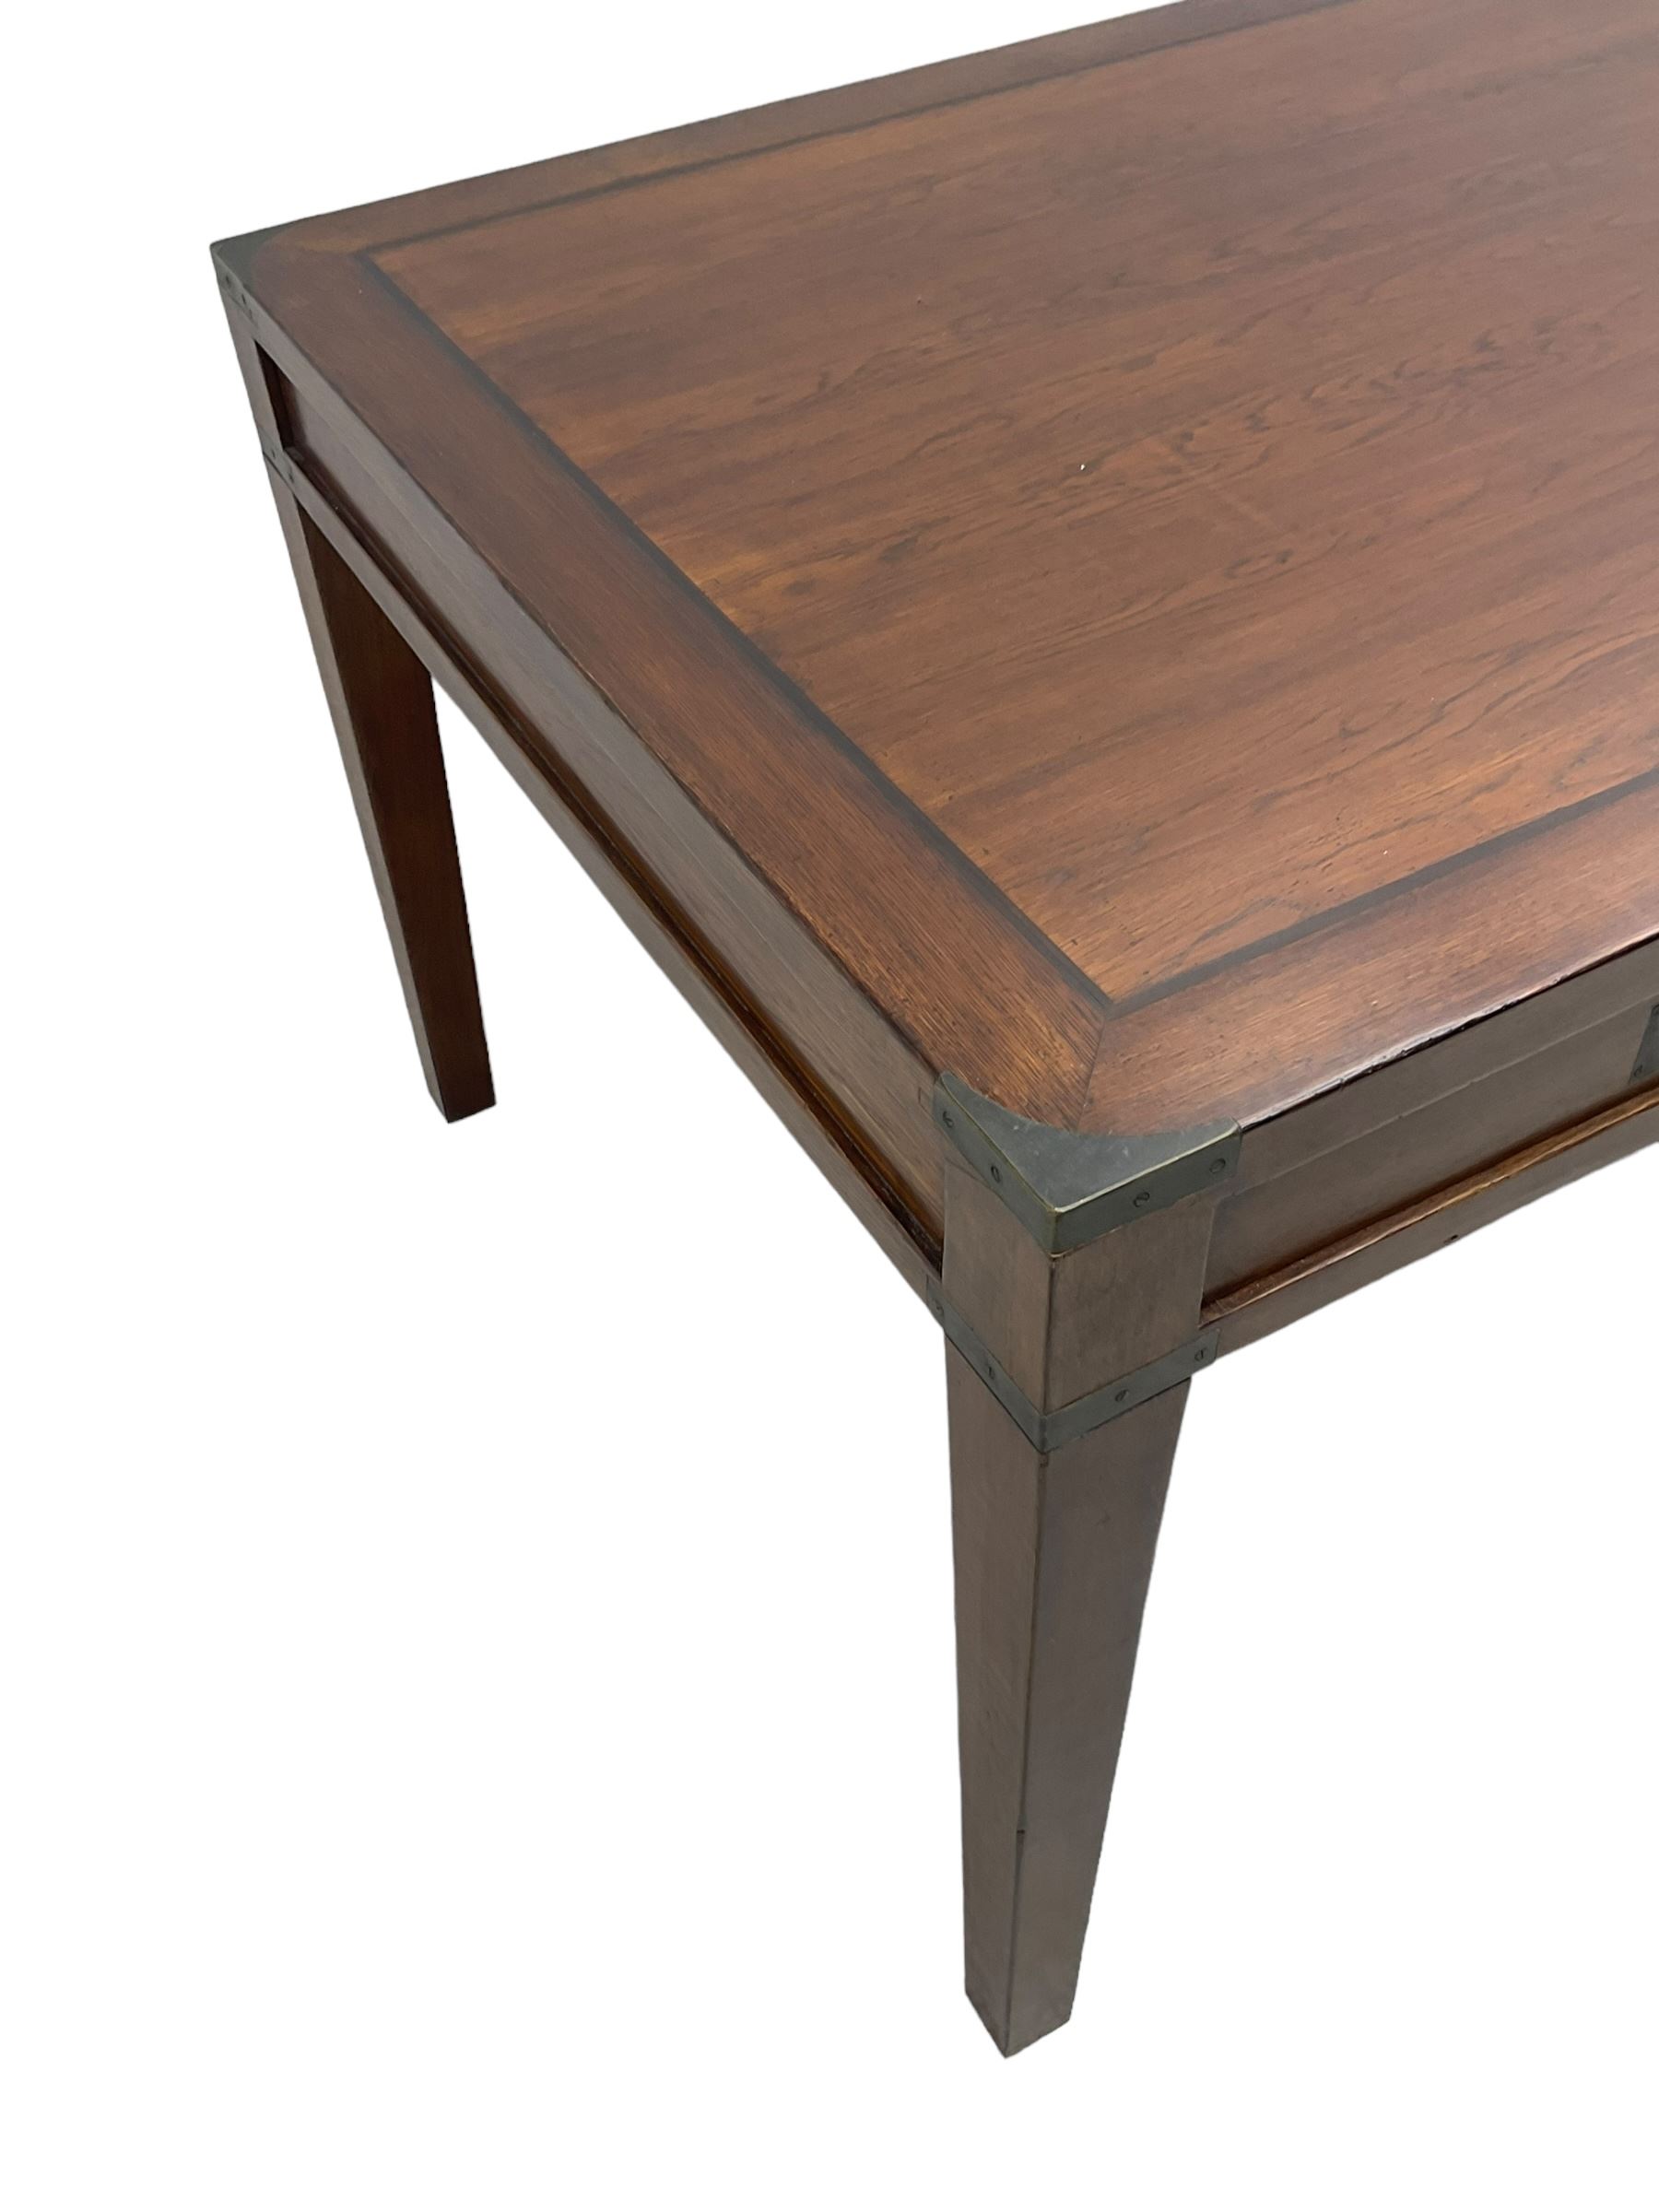 20th century military campaign design oak office or dining table - Image 3 of 5